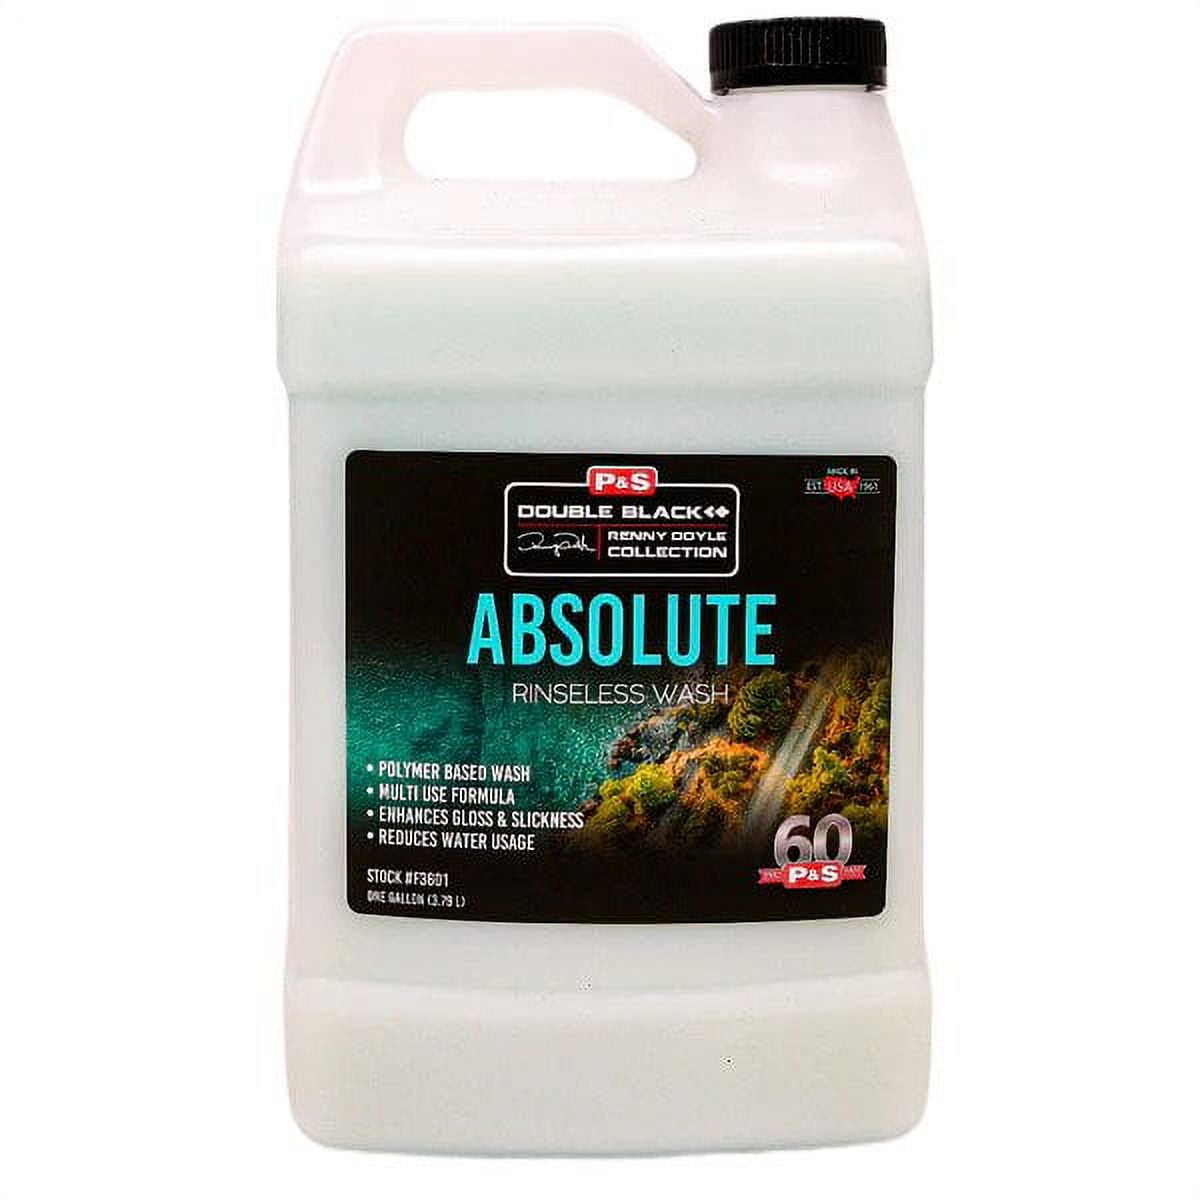 P&S Detailing F3601 Absolute Rinseless Wash for Car/Auto Detailing